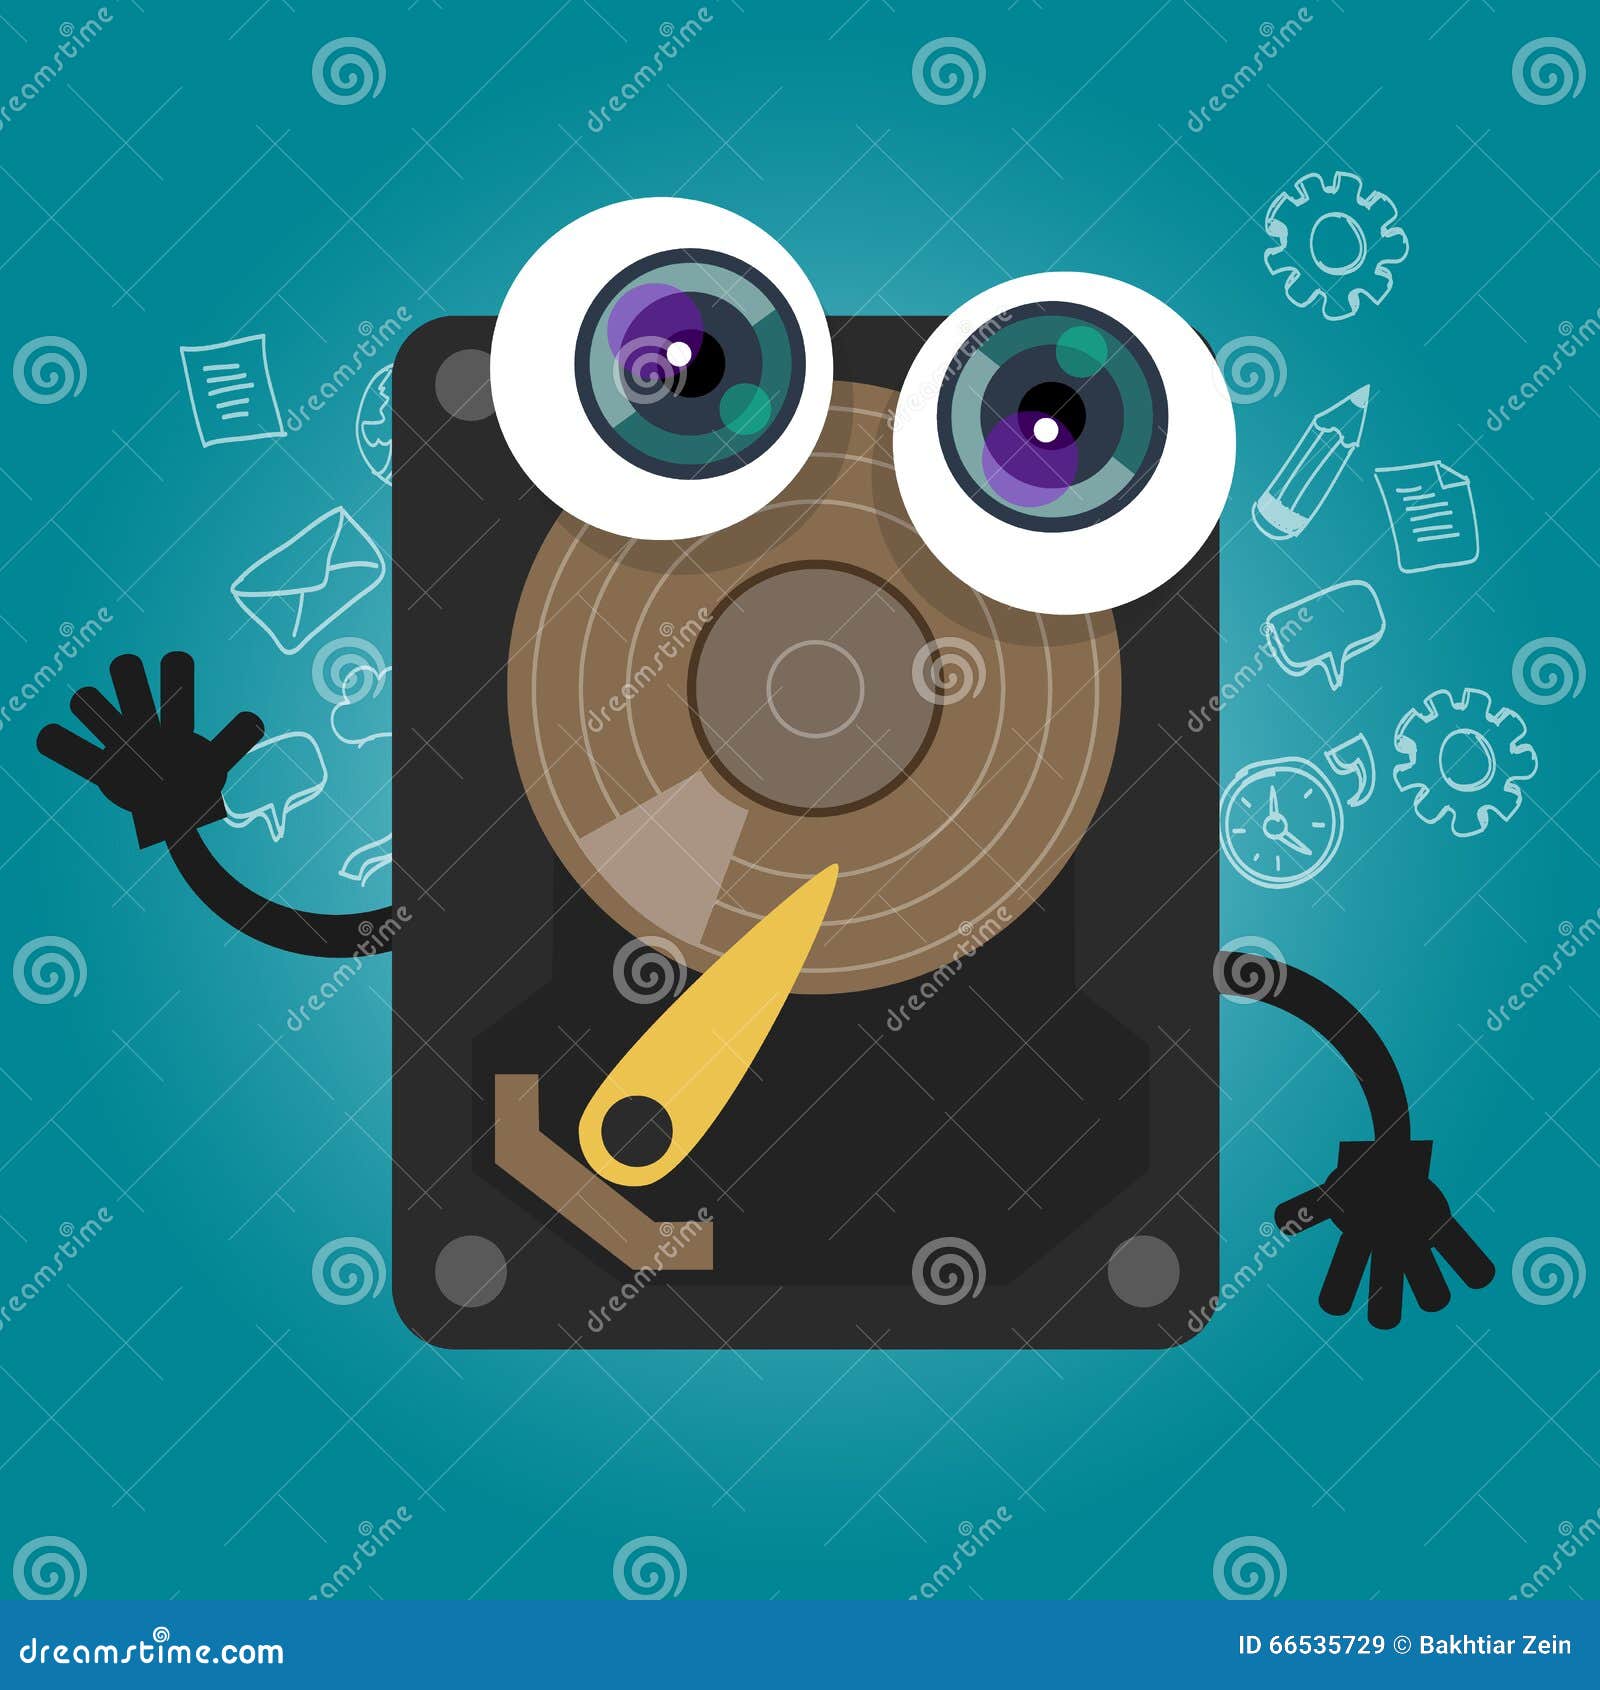 Hard Drive Computer Component Database Big Data Storage Cartoon Eyes Mascot  Cute Funny Smile Tech Object Vector Stock Vector - Illustration of comic,  drive: 66535729